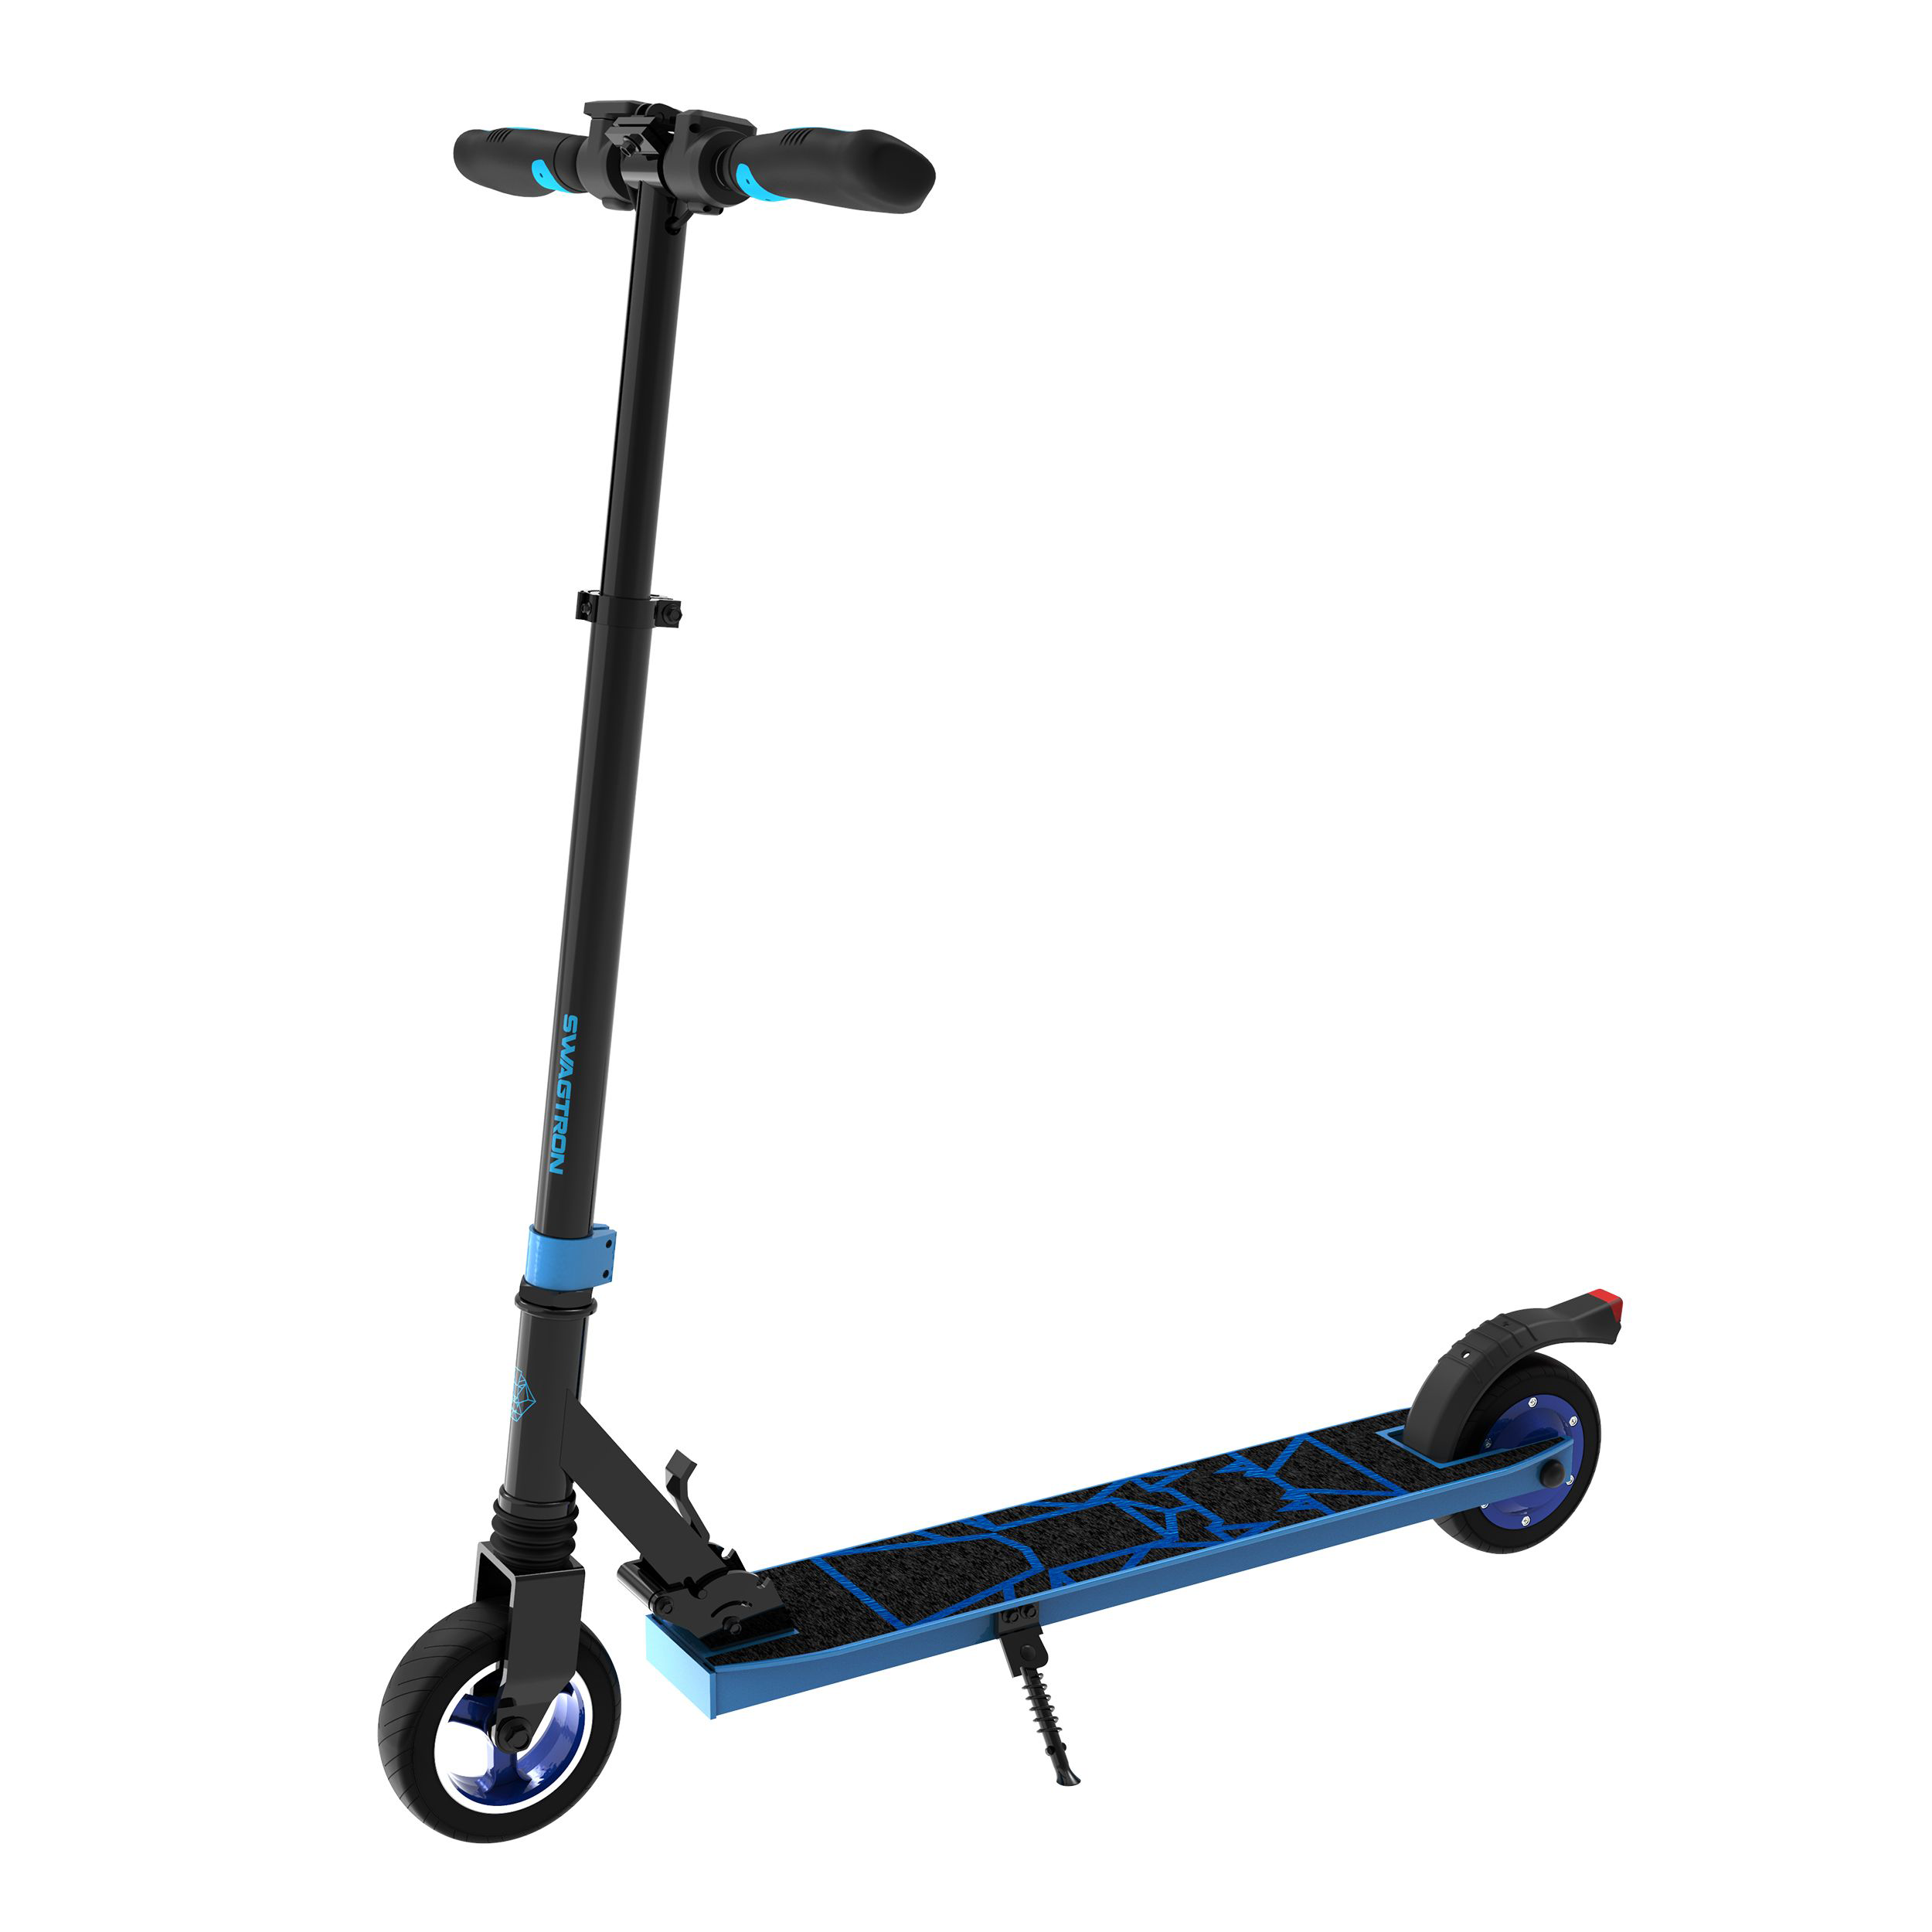 Swagtron Swagger SG-8 Foldable Electric Scooter for Kids or Teens